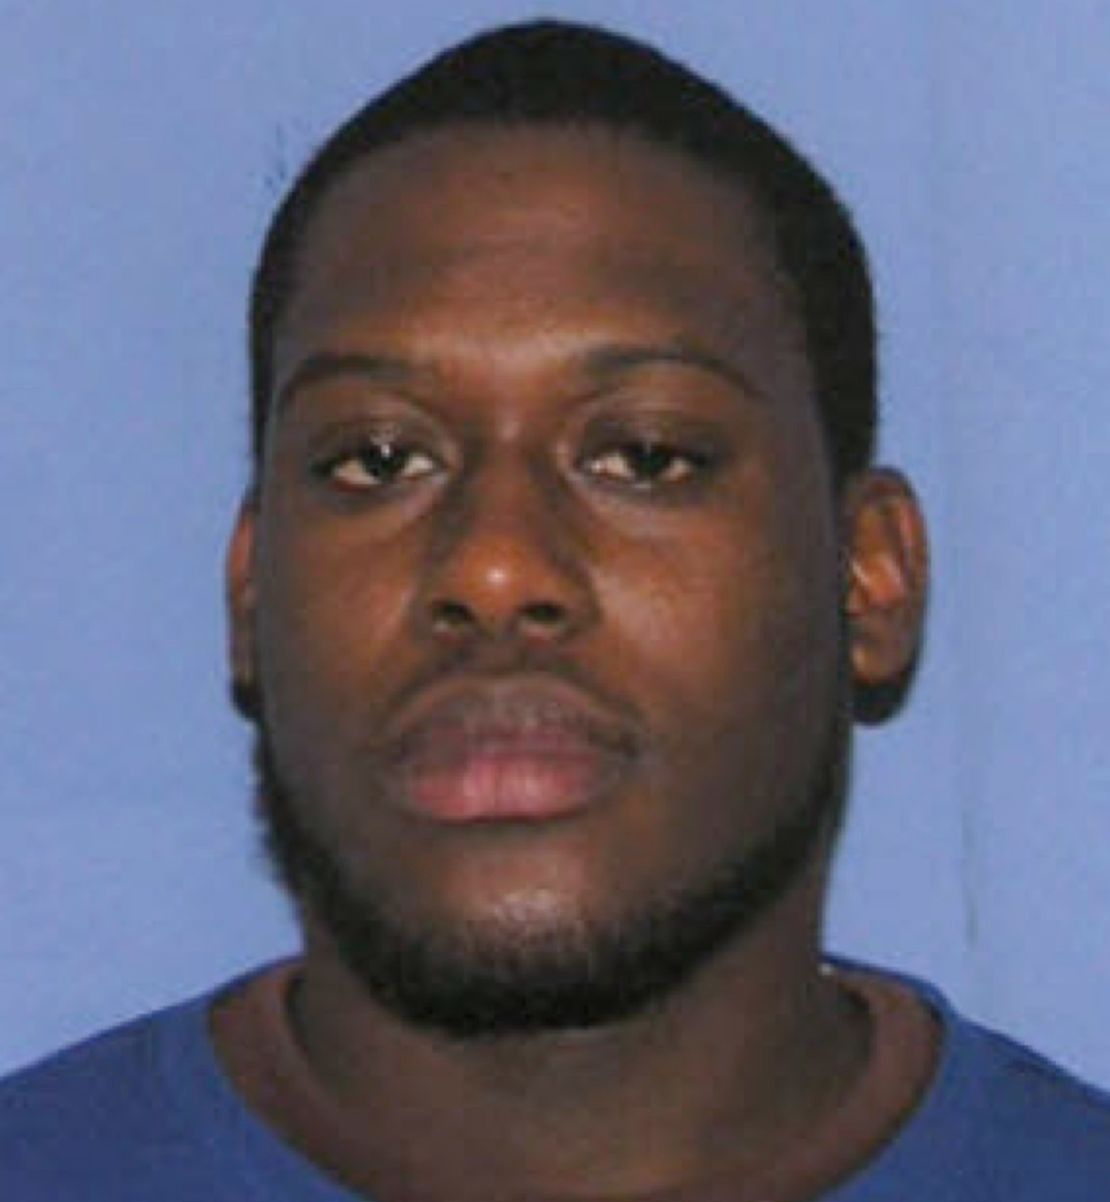 Lawrence Reed, 22, has been charged in the murder of Marco McMillian, authorities said.